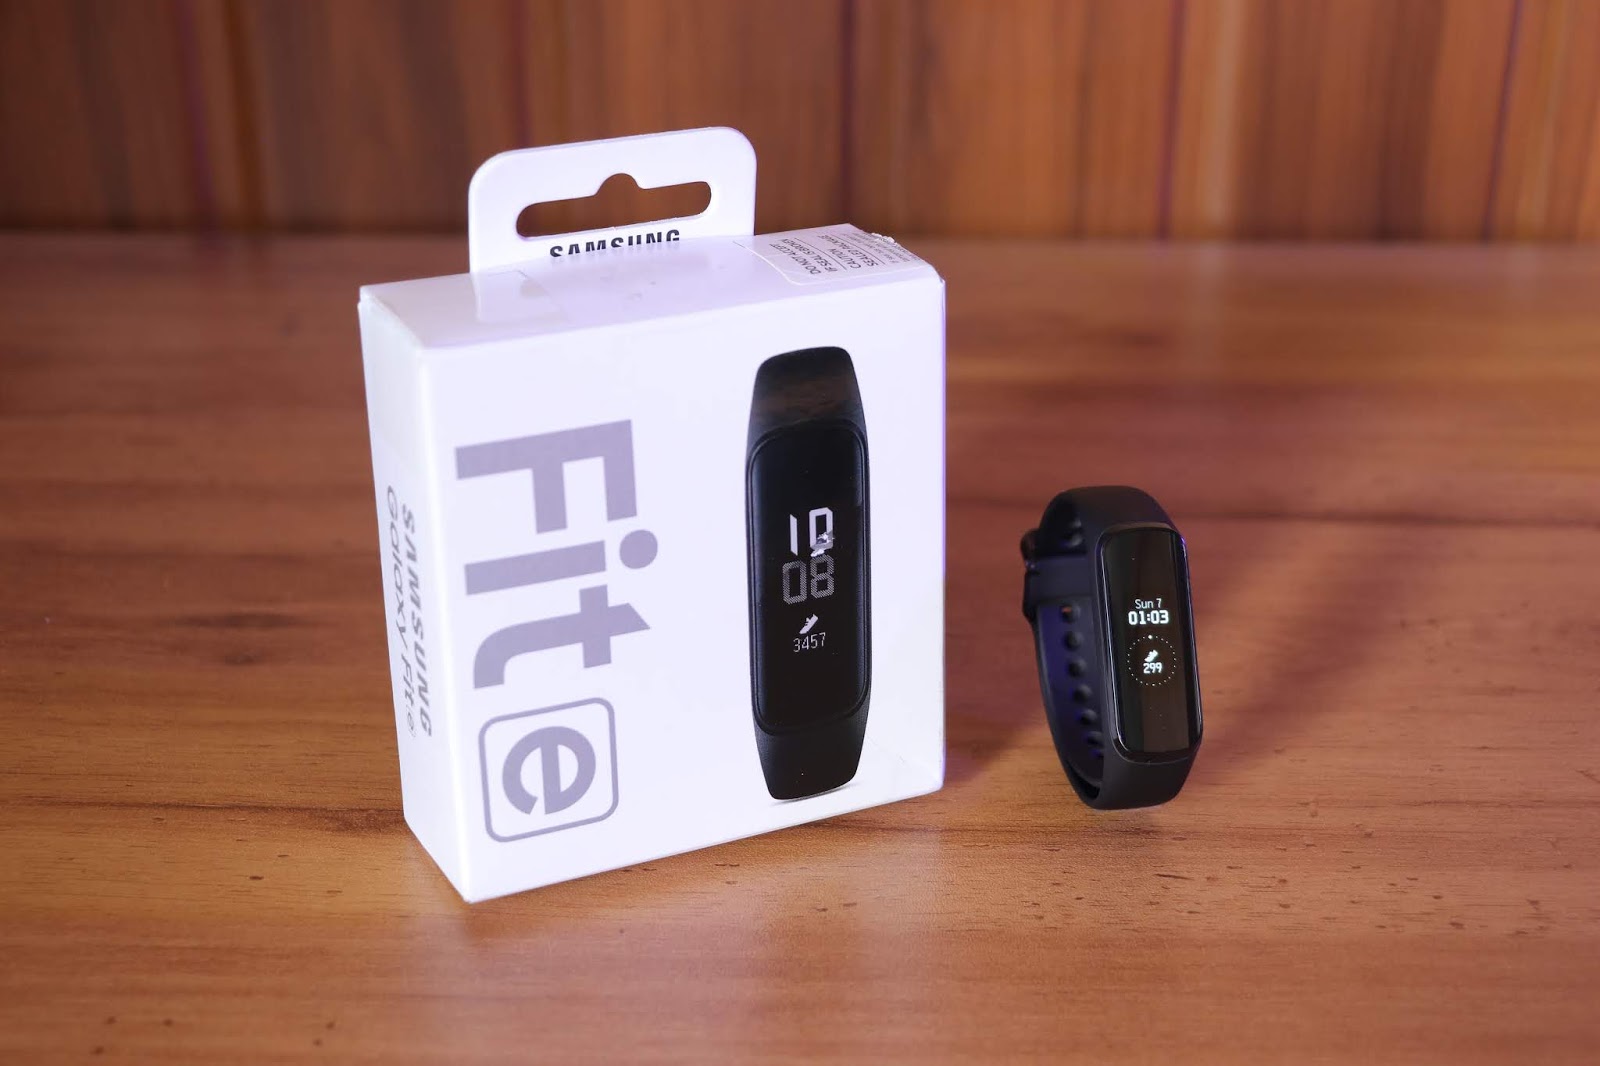 Samsung Galaxy Fit e Smart Band | In-Depth Review & Unboxing